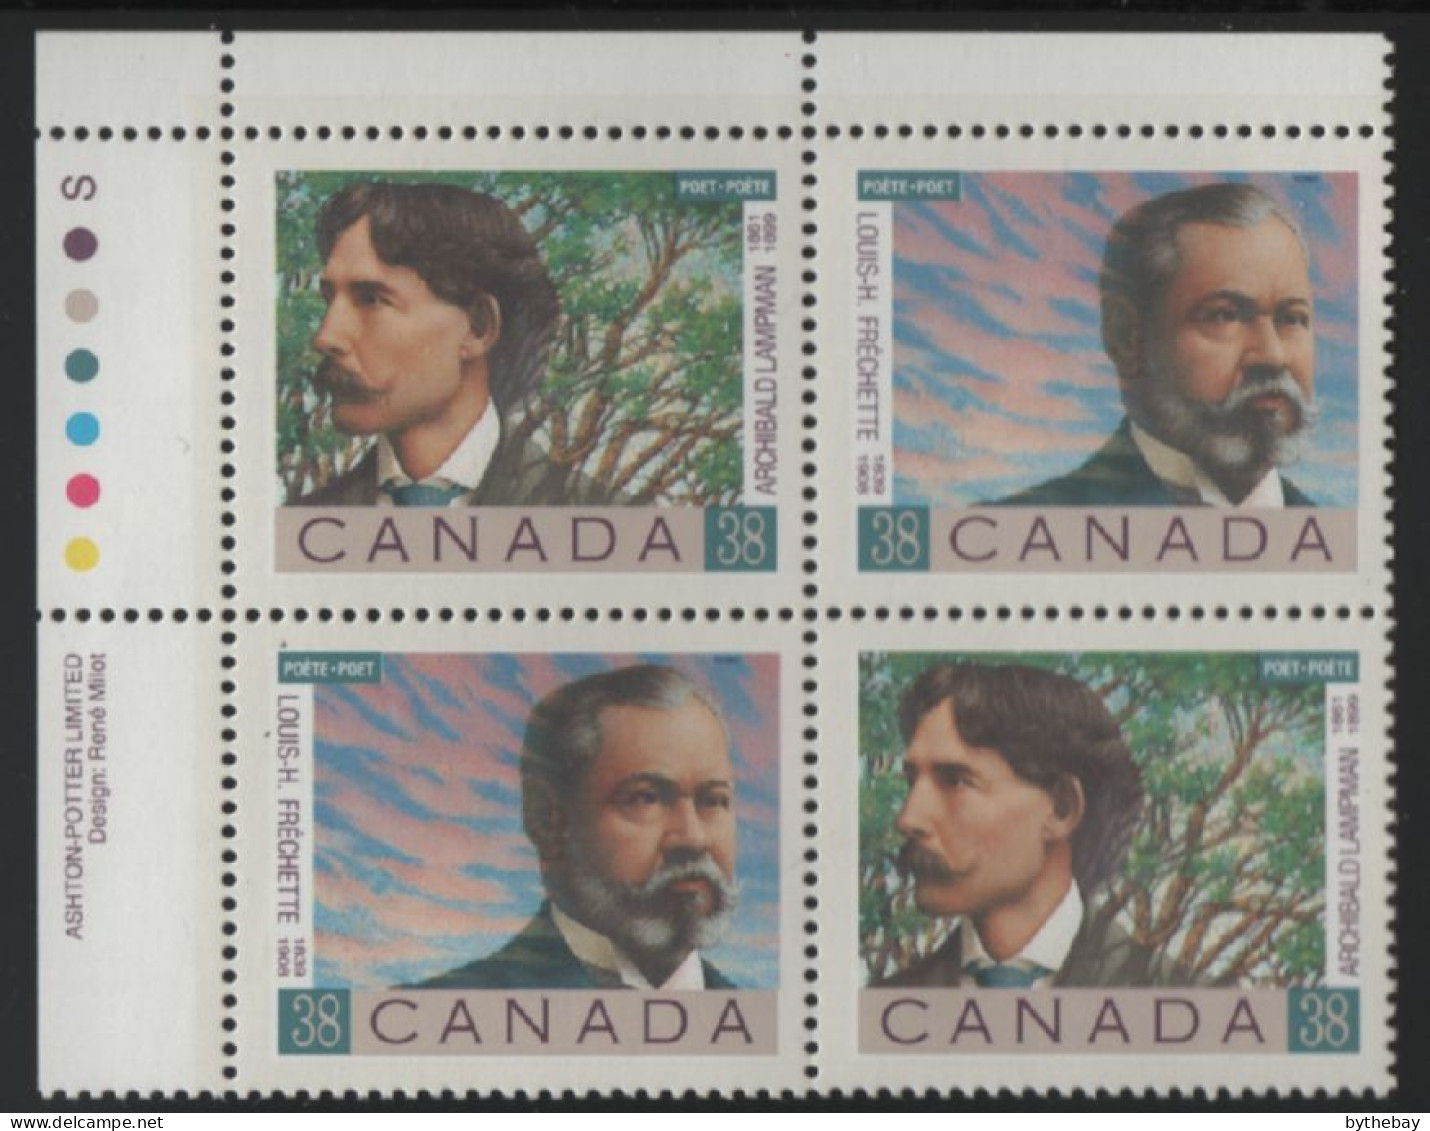 Canada 1989 MNH Sc 1244a 38c Poets UL Plate Block - Num. Planches & Inscriptions Marge